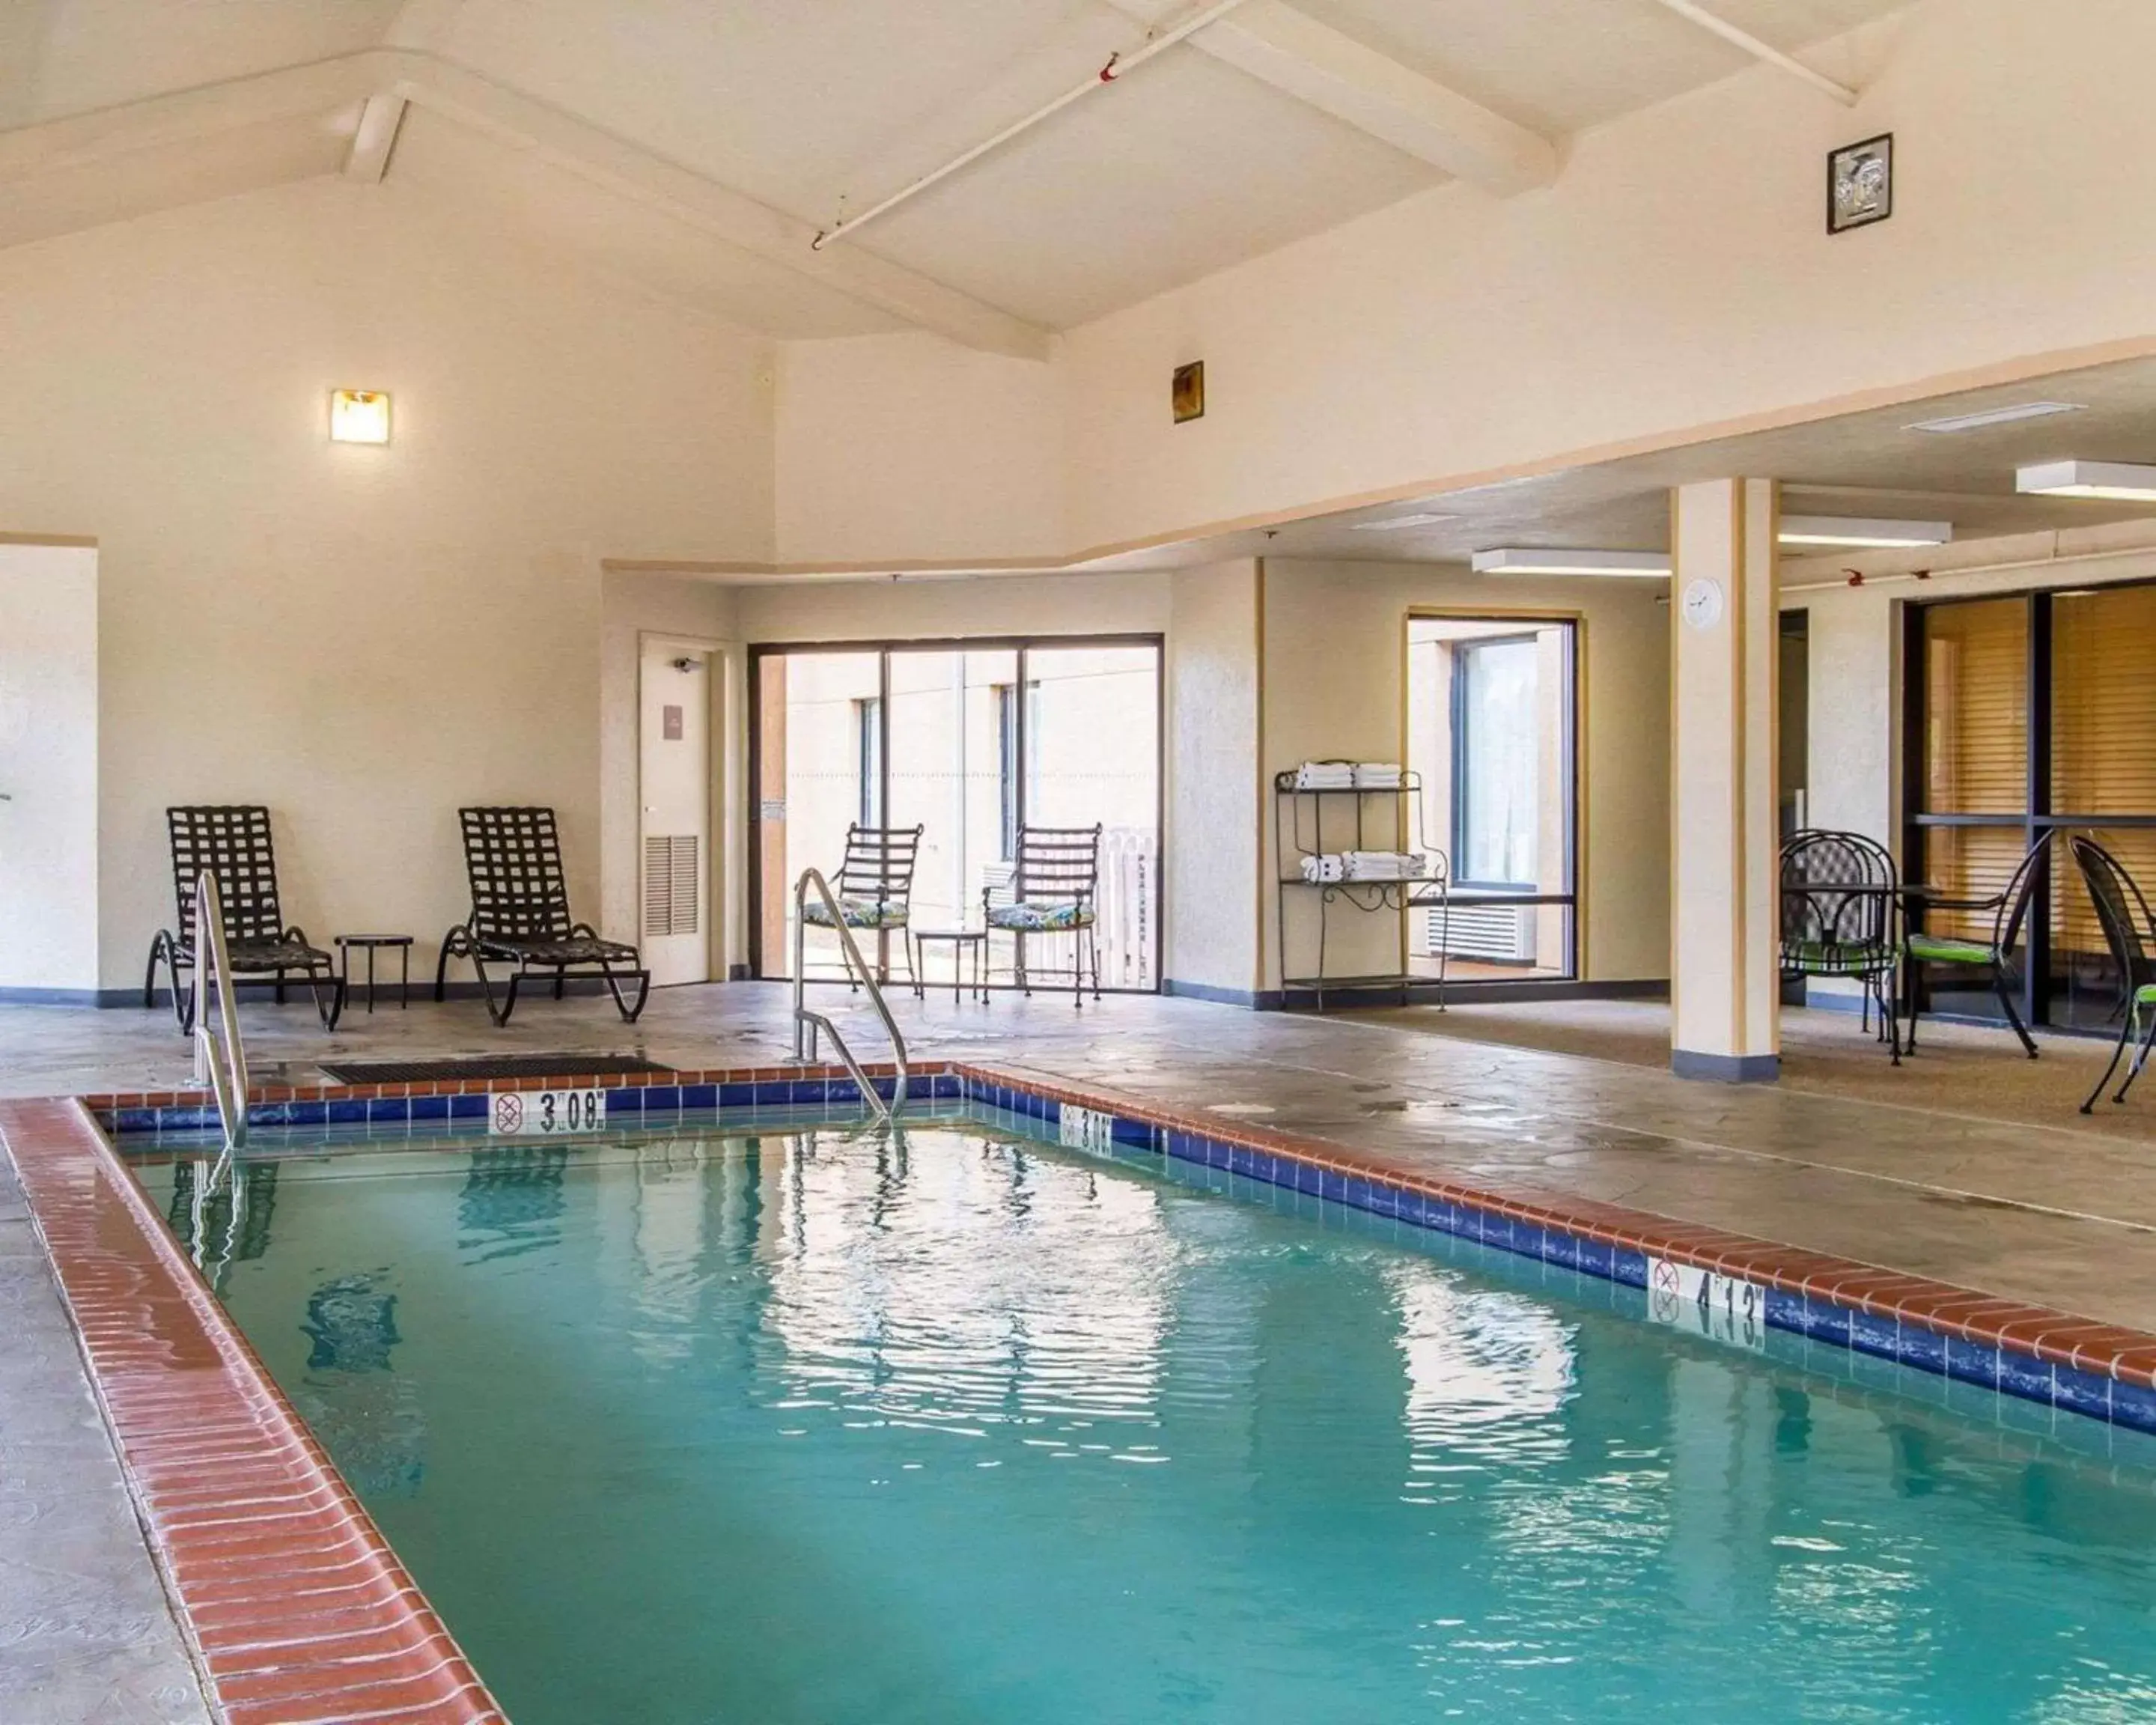 On site, Swimming Pool in Quality Inn & Suites Benton - Draffenville